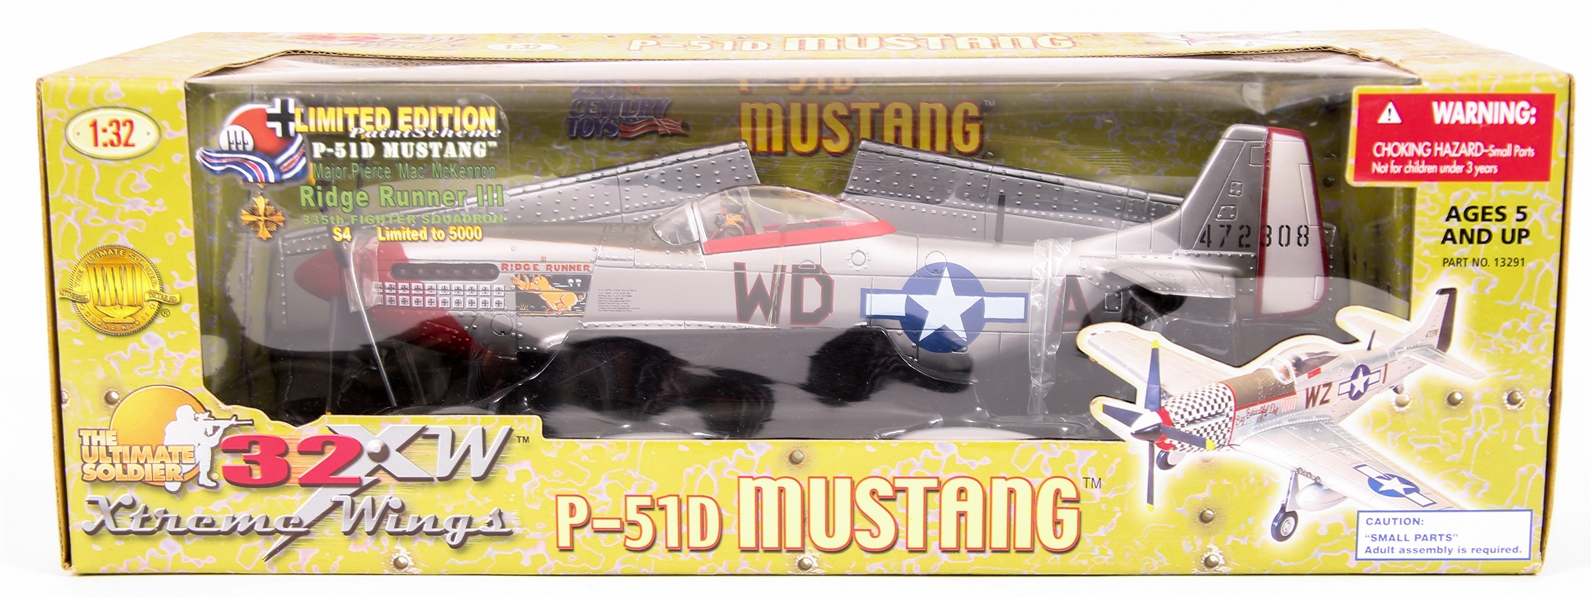 21ST CENTURY ULTIMATE SOLDIER 32XW P-51D MUSTANG 